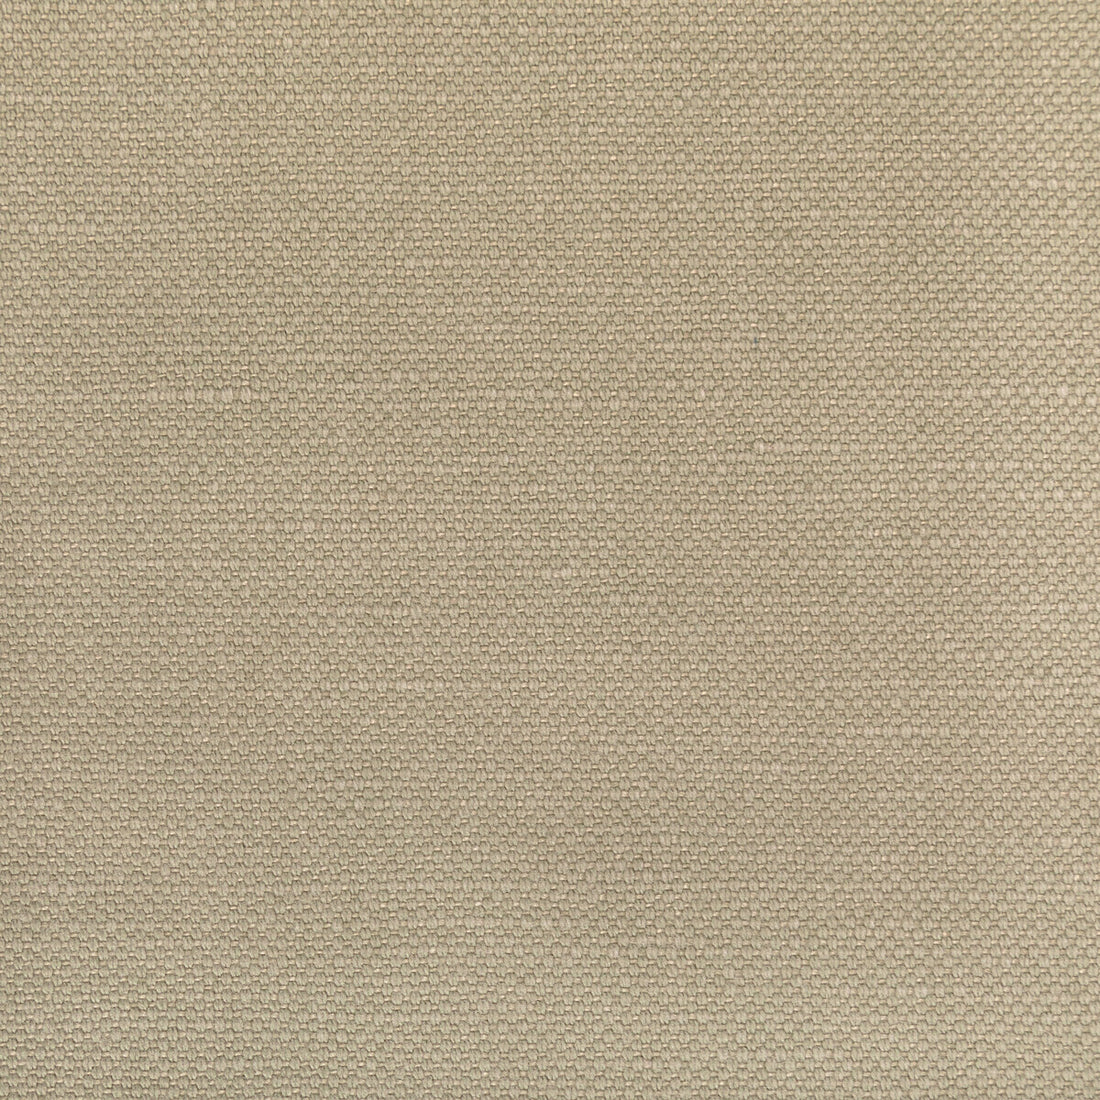 Carson fabric in stone color - pattern 36282.6106.0 - by Kravet Basics